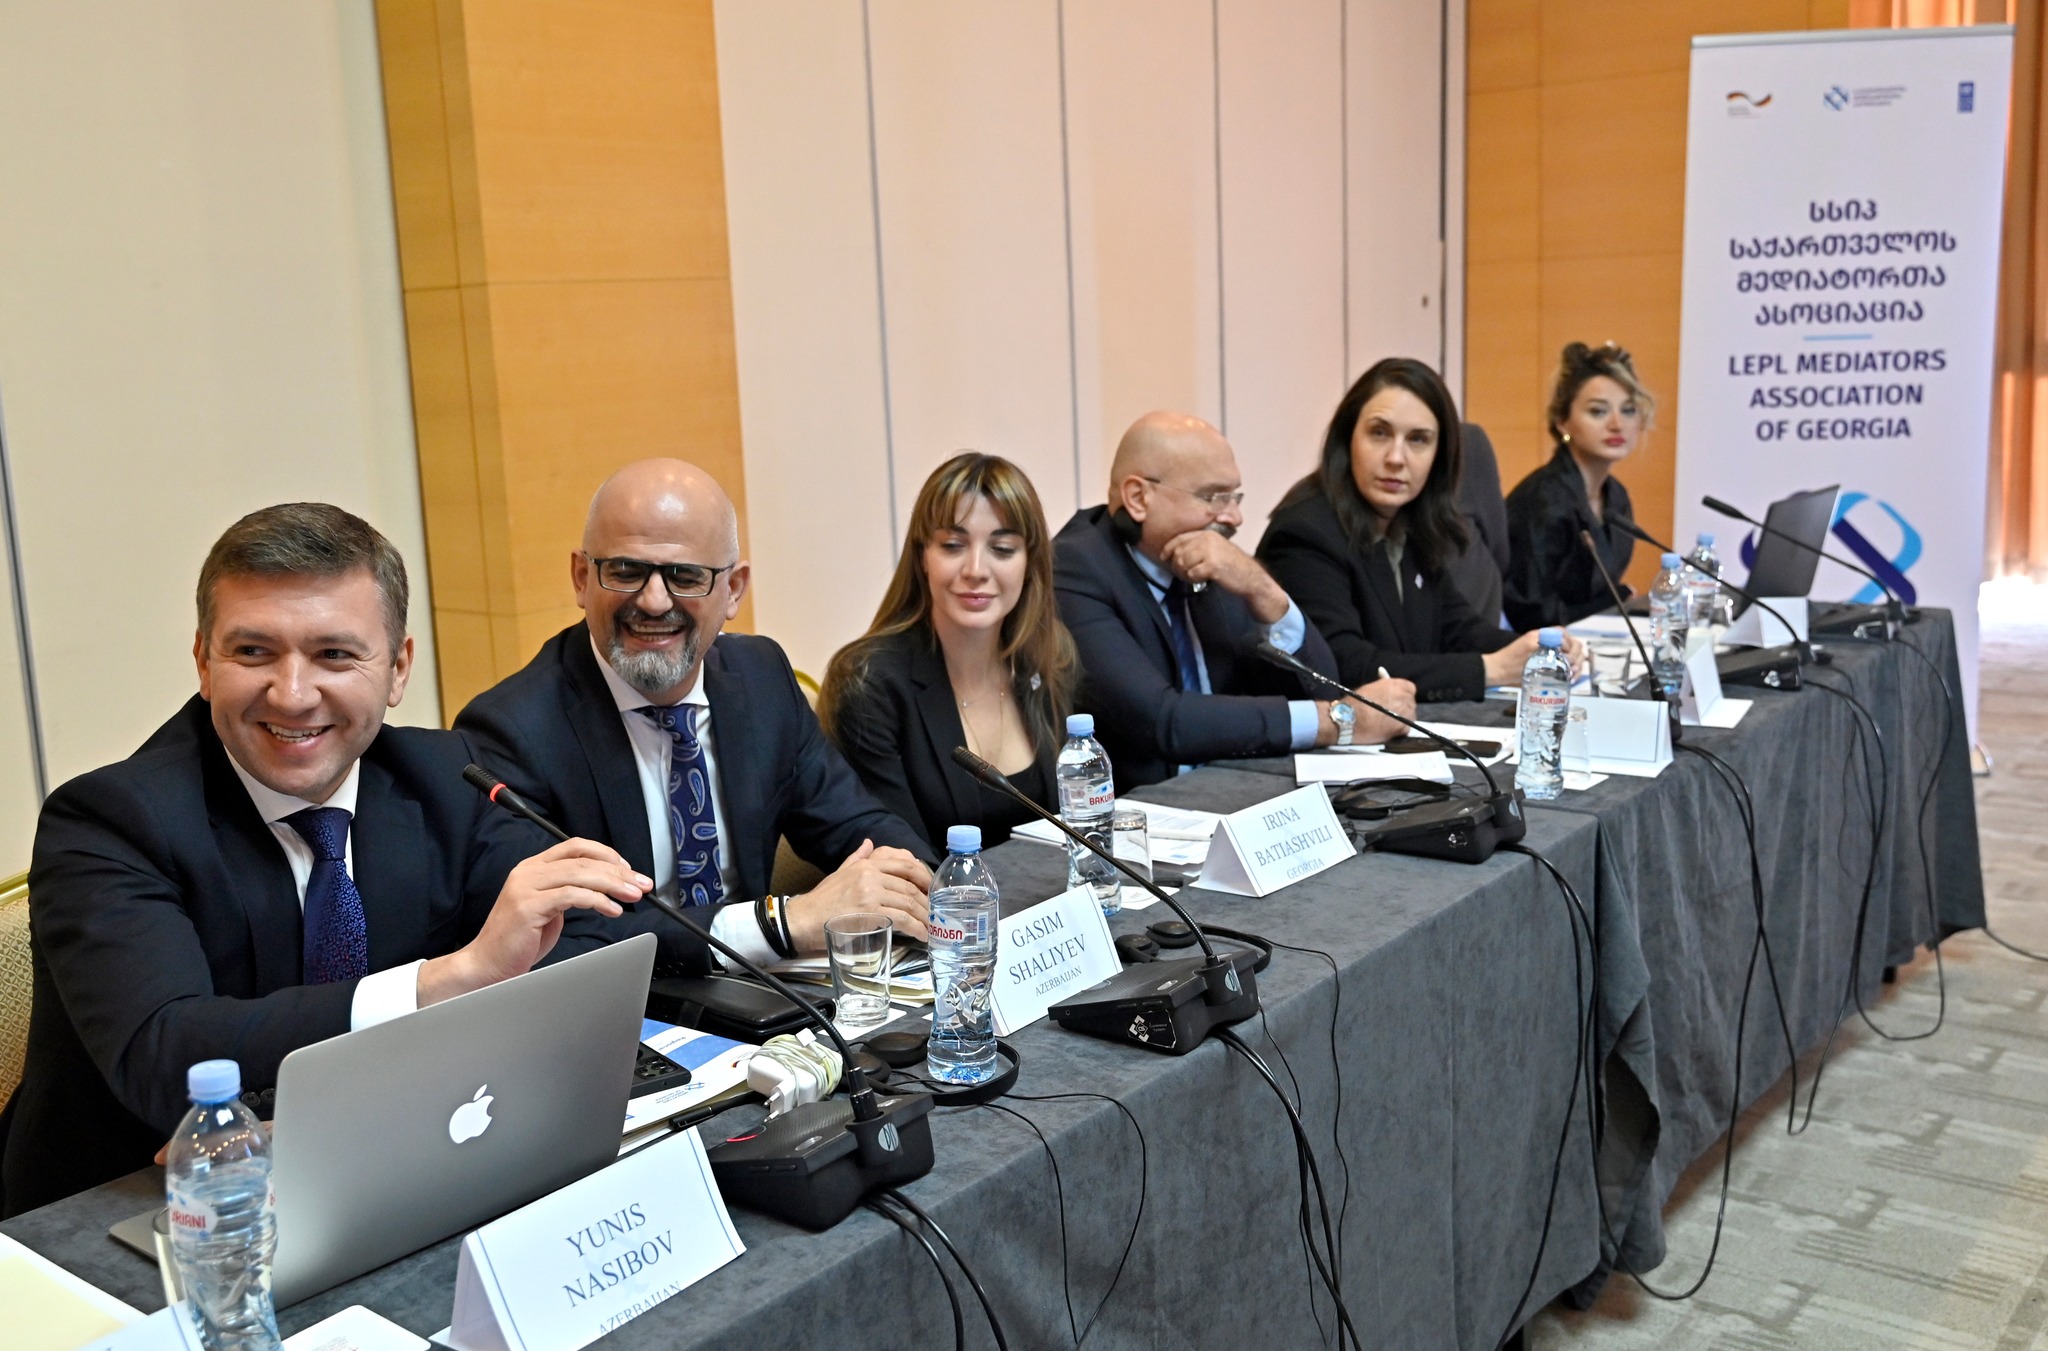 The Mediators Association of Georgia hosted the regional conference